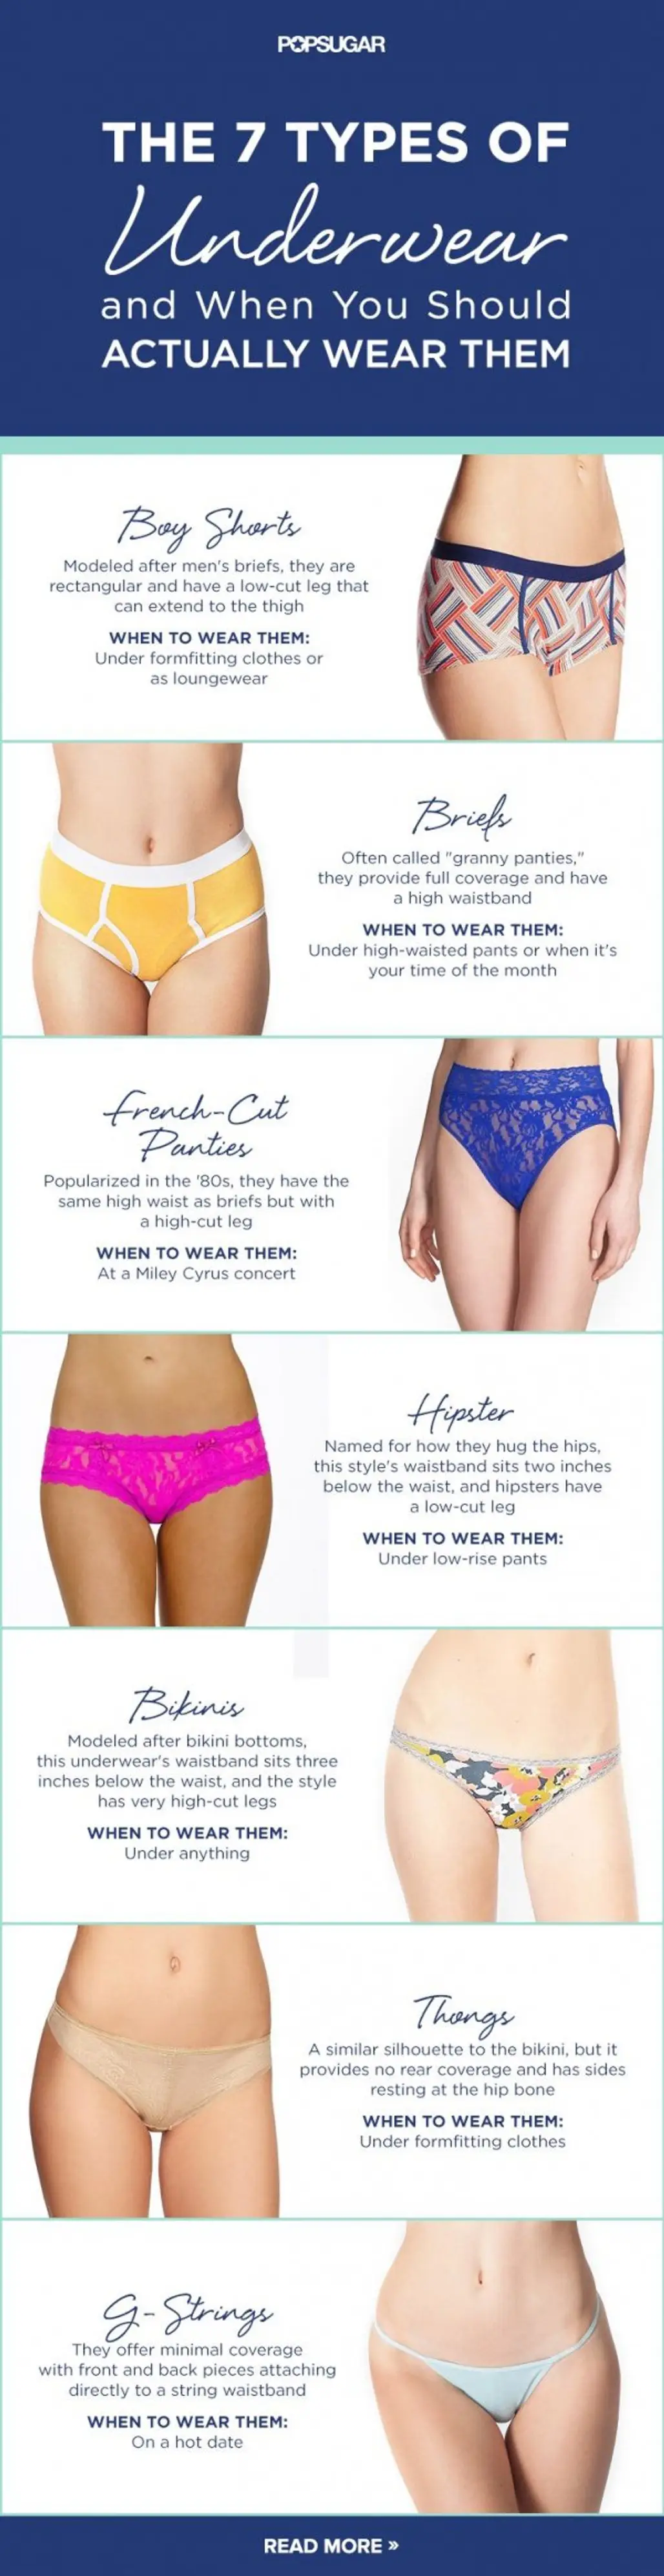 Know Everything There is to Know about Lingerie with These Infographics